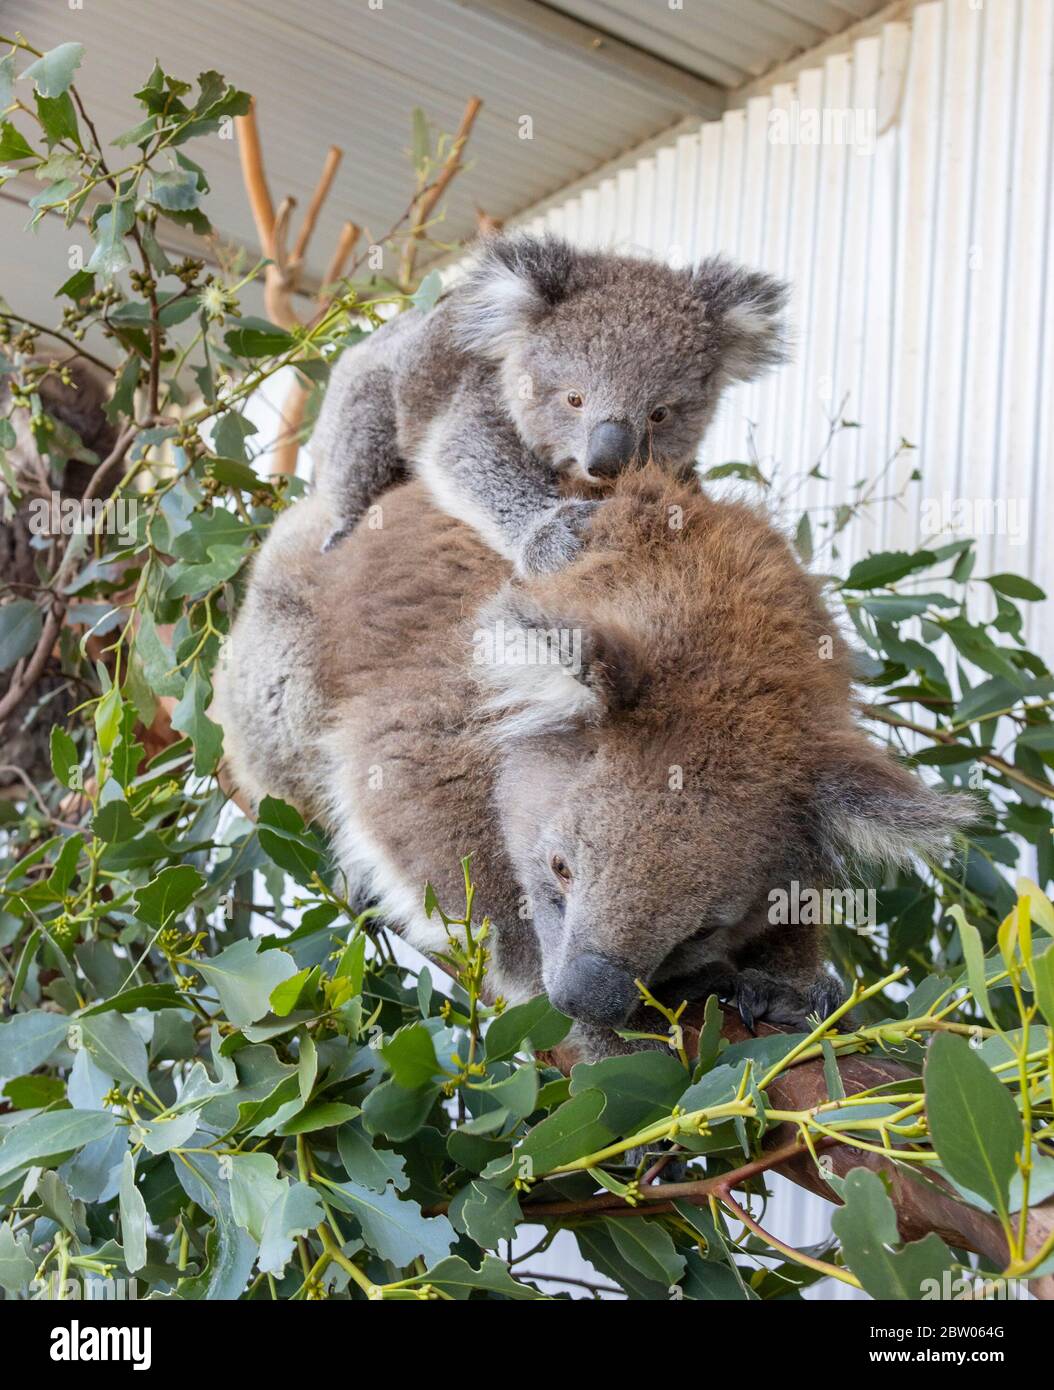 A female koala and its pup on its back, in a wildlife park in Australia. Stock Photo